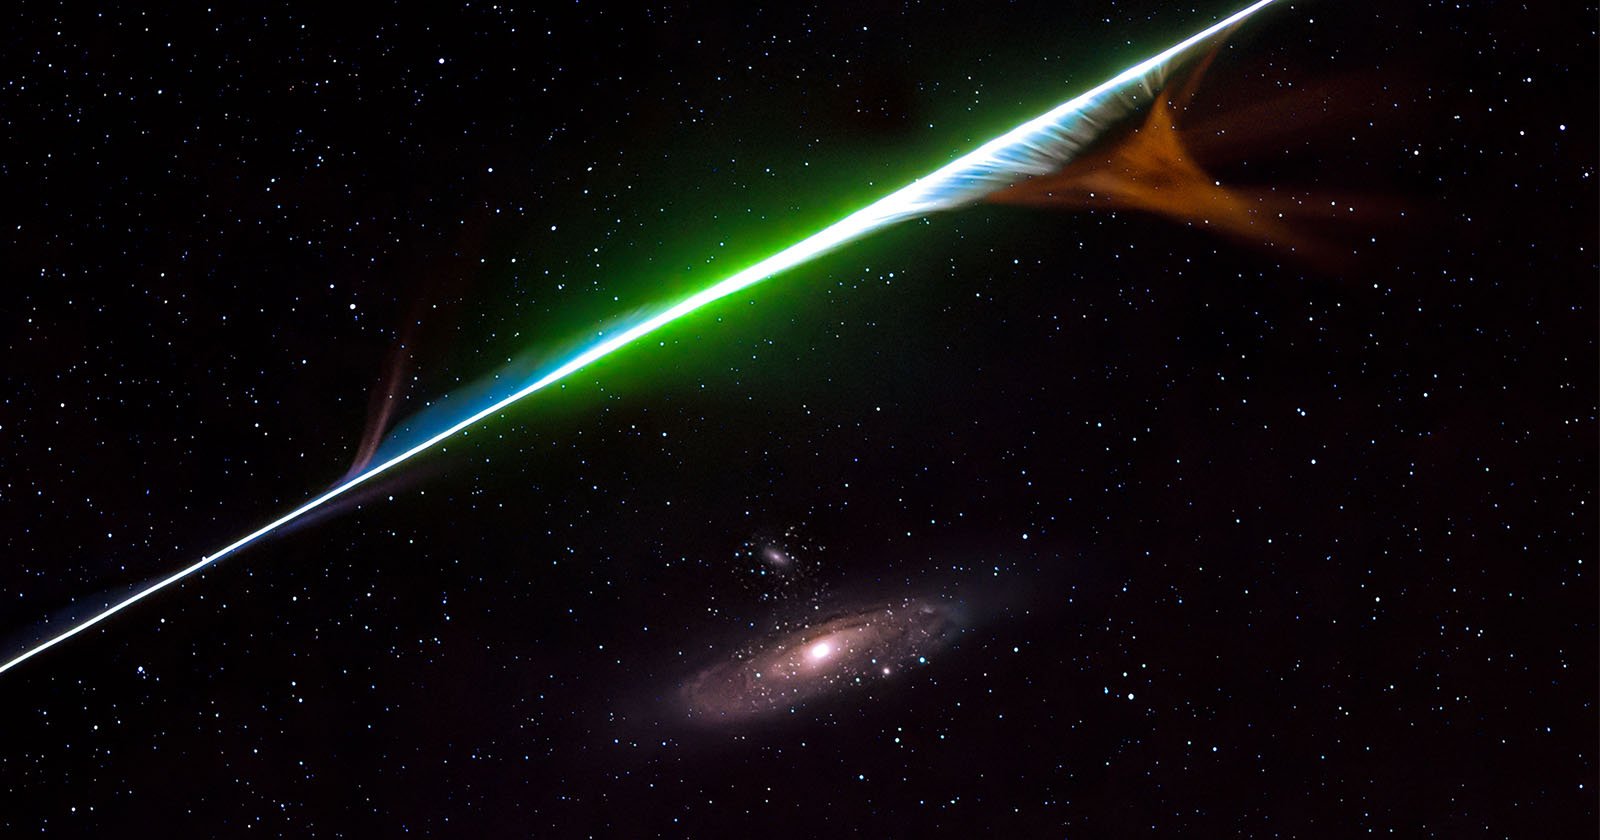  behind once-in-a-lifetime photo meteor streaking andromeda 